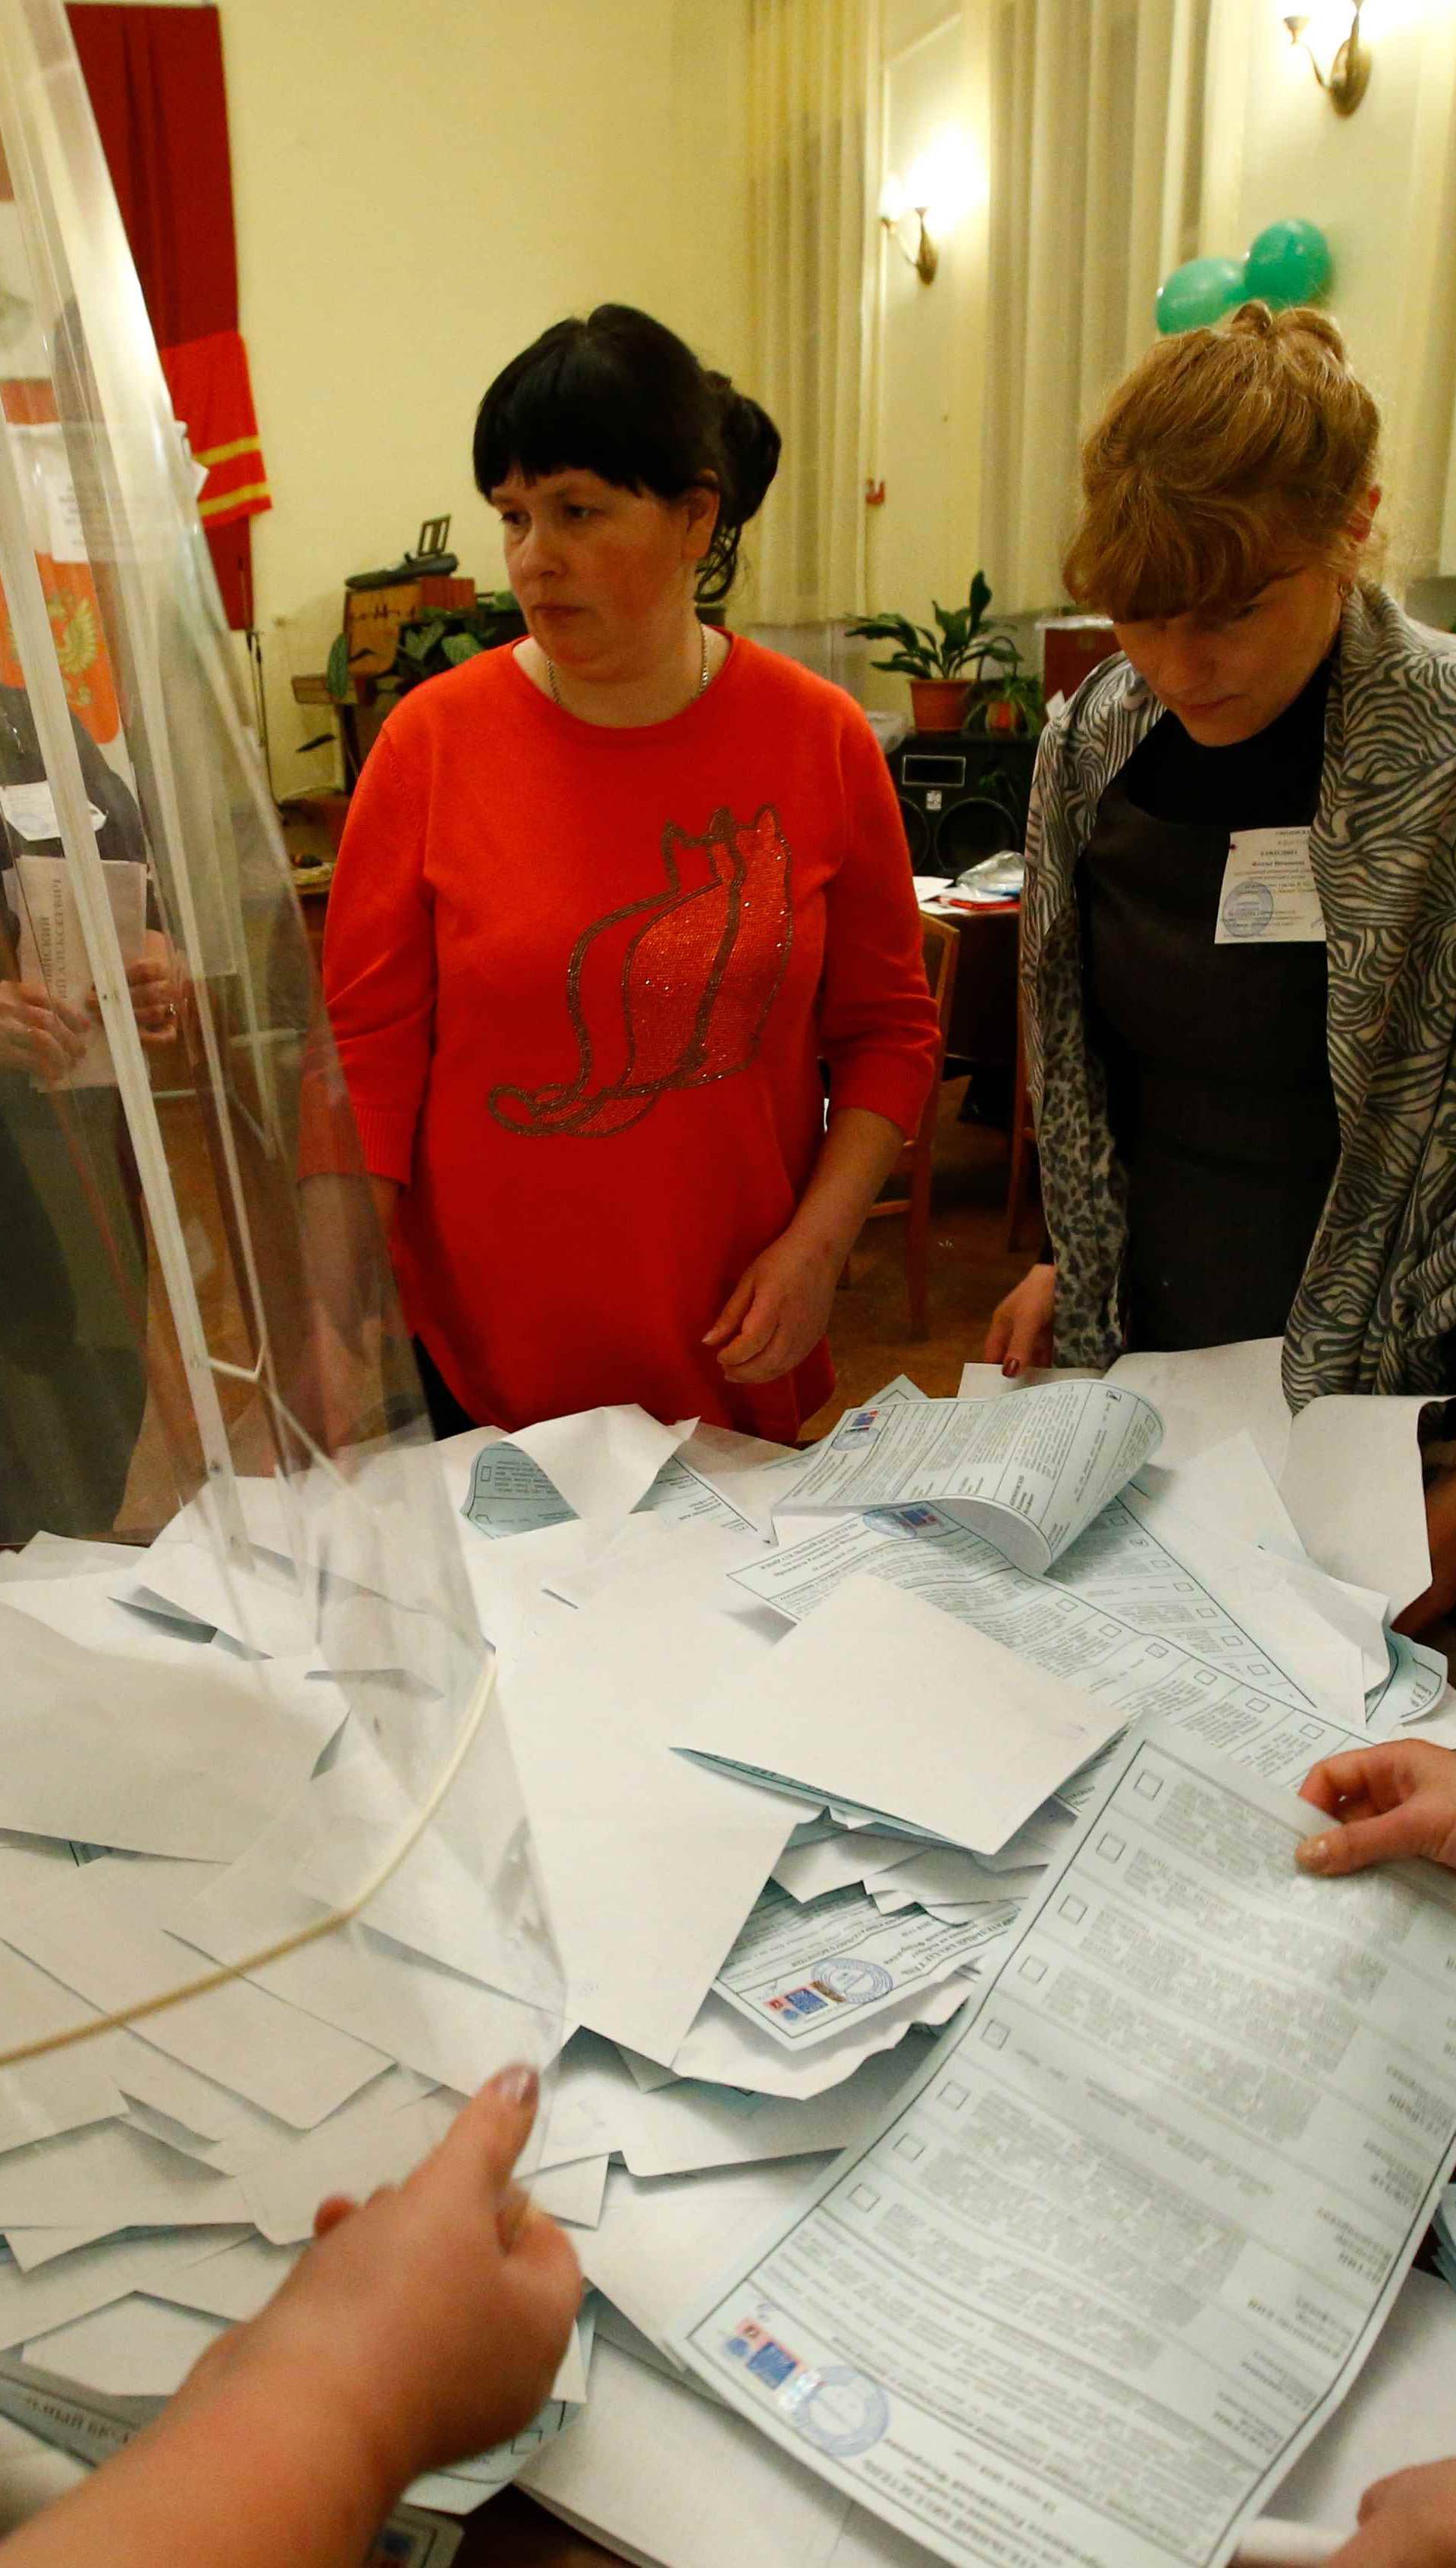 Members of a local election commission empty a ballot box before starting to count votes during the presidential election at a polling station in a settlement in Smolensk Region